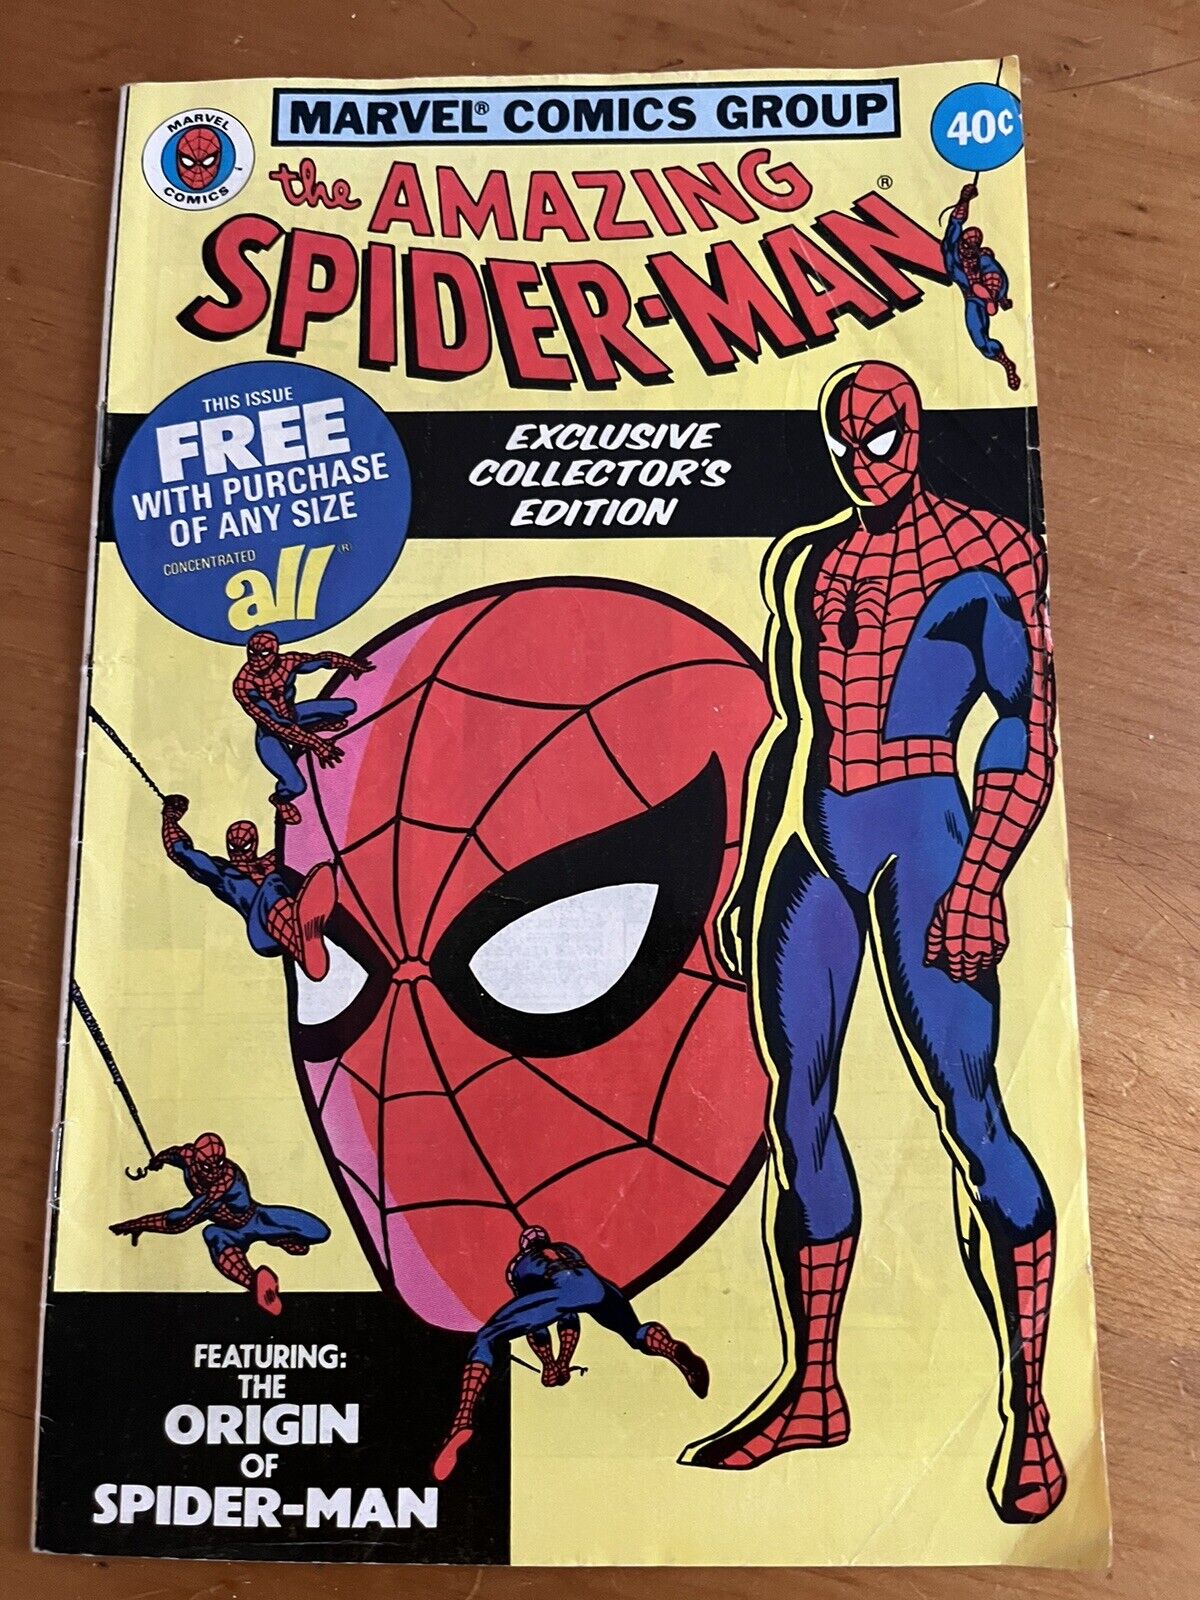 ORIGIN OF THE AMAZING SPIDERMAN 1979 ALL DETERGANT GIVEAWAY PROMO